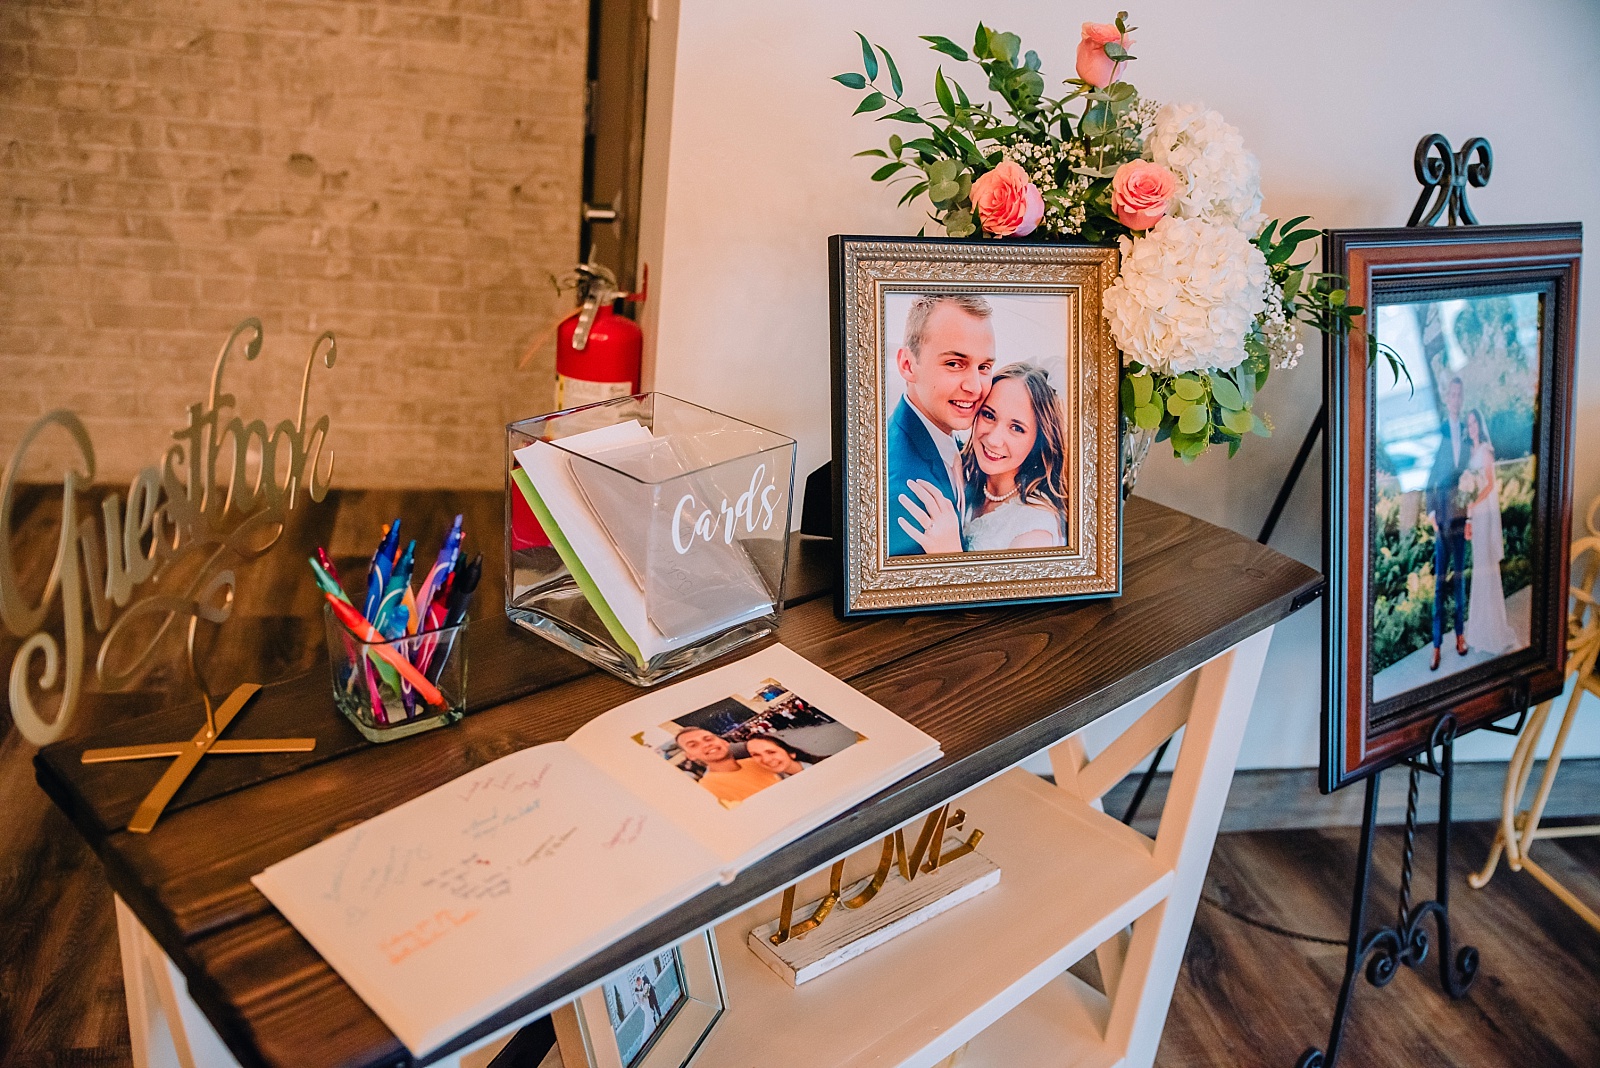 guest book with photos of couple throughout